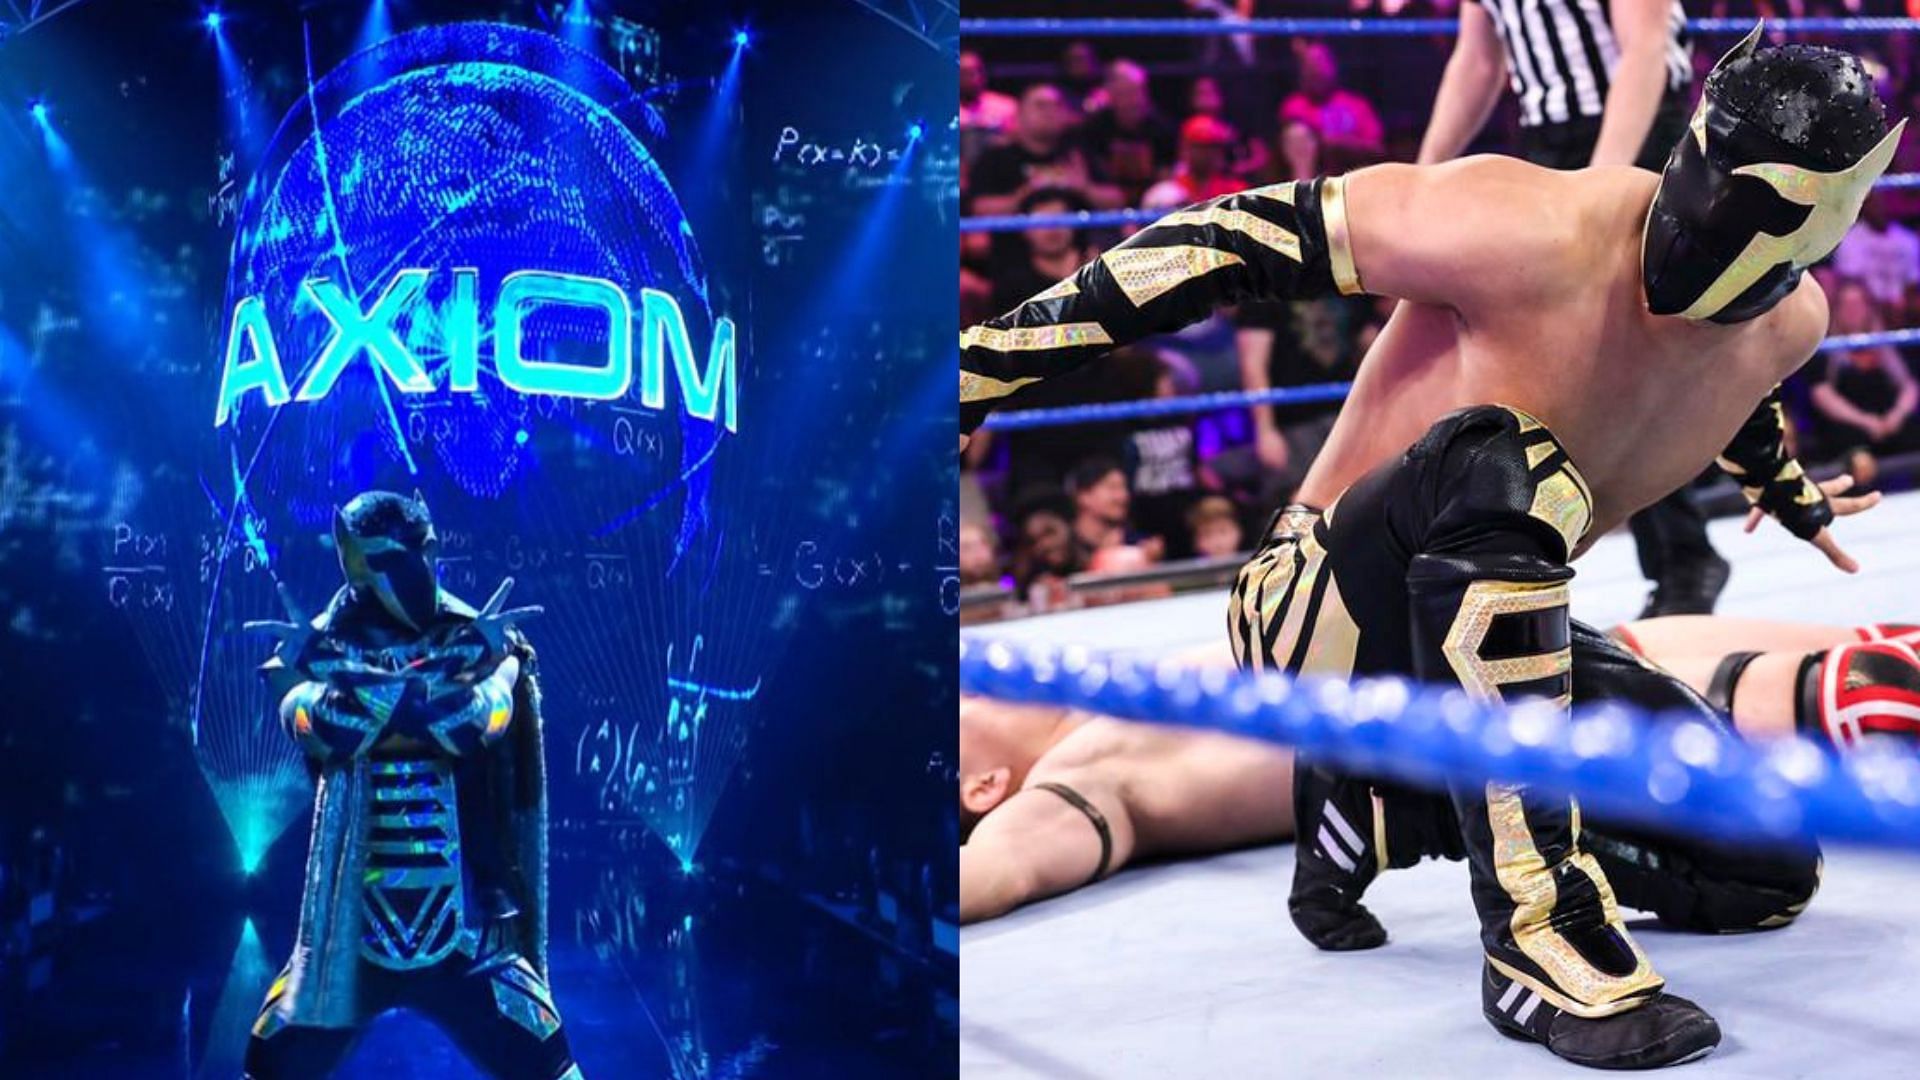 WWE Superstar Axiom was in action on the recent episode of NXT